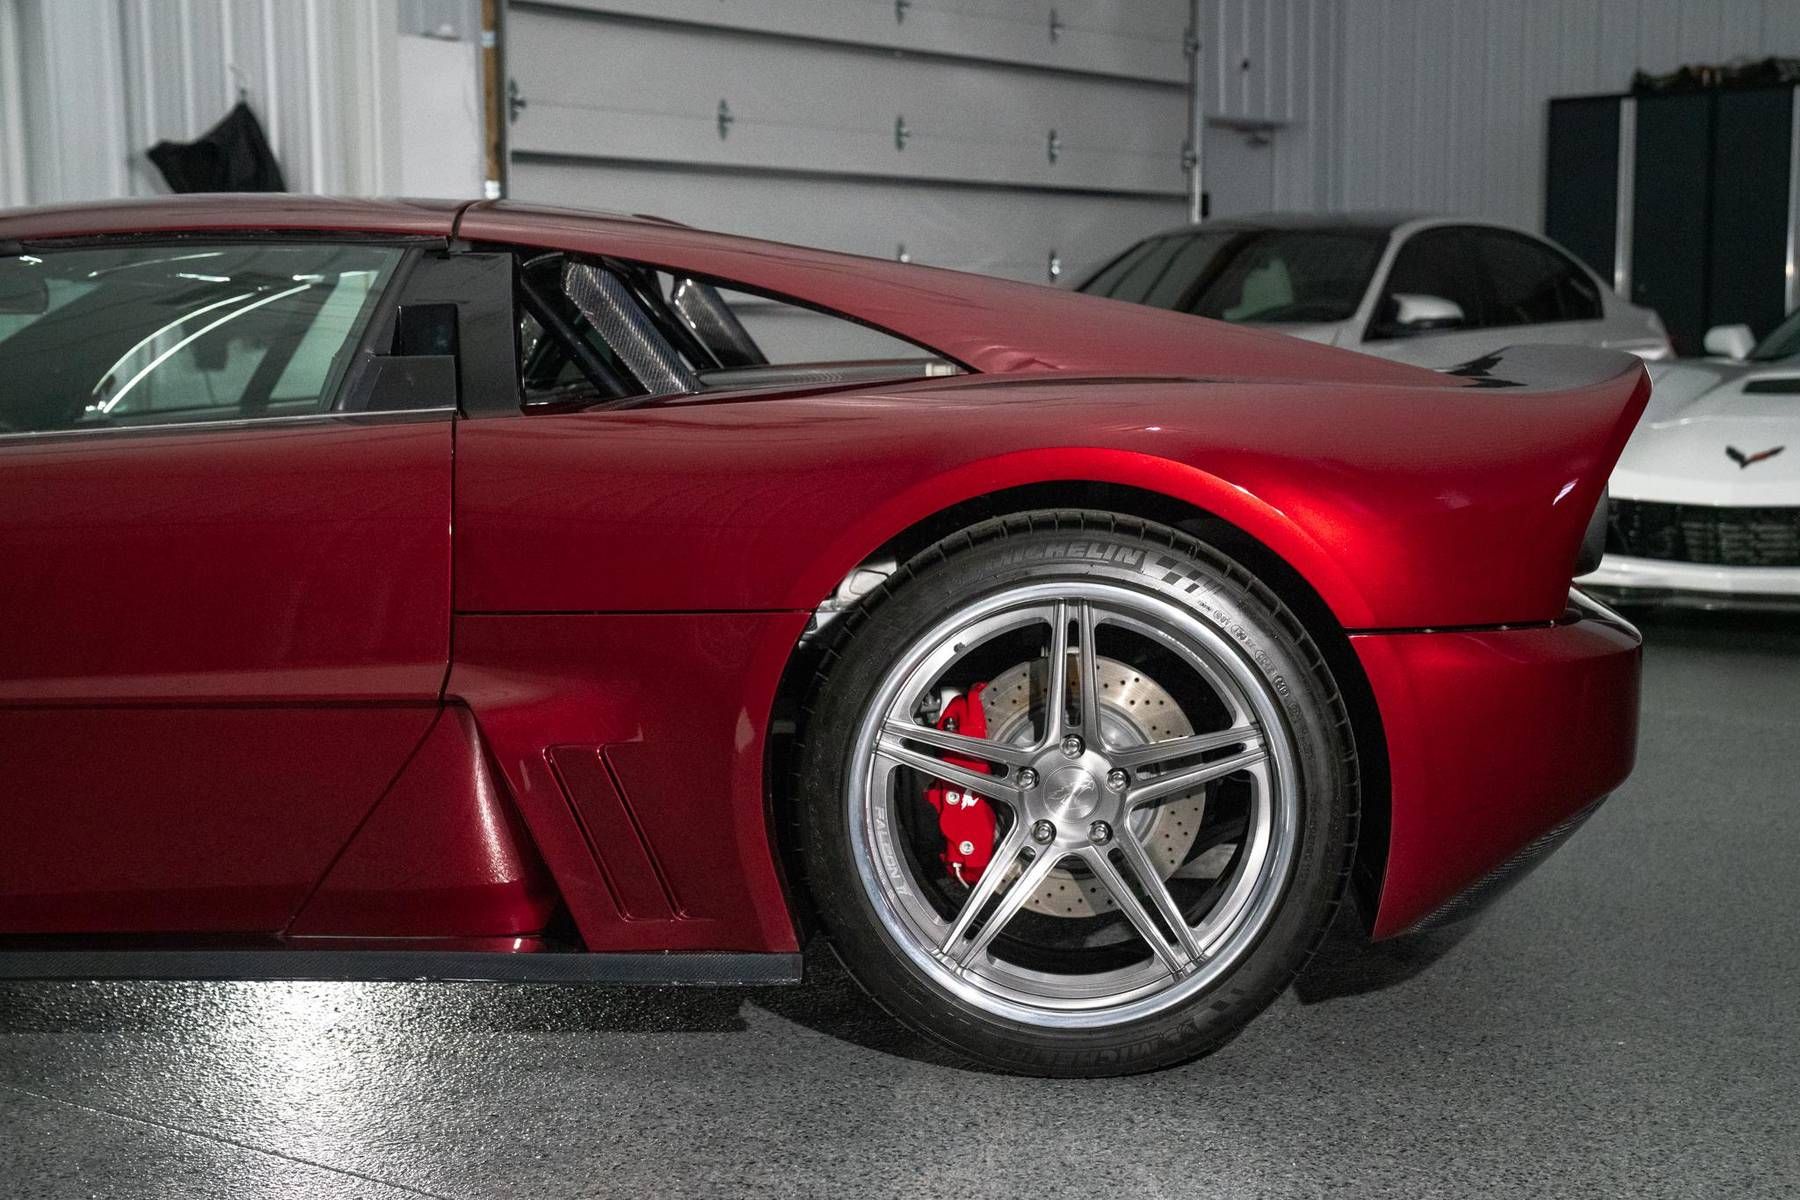 2014 Falcon F7 - The Supercar You Didn't Know Existed